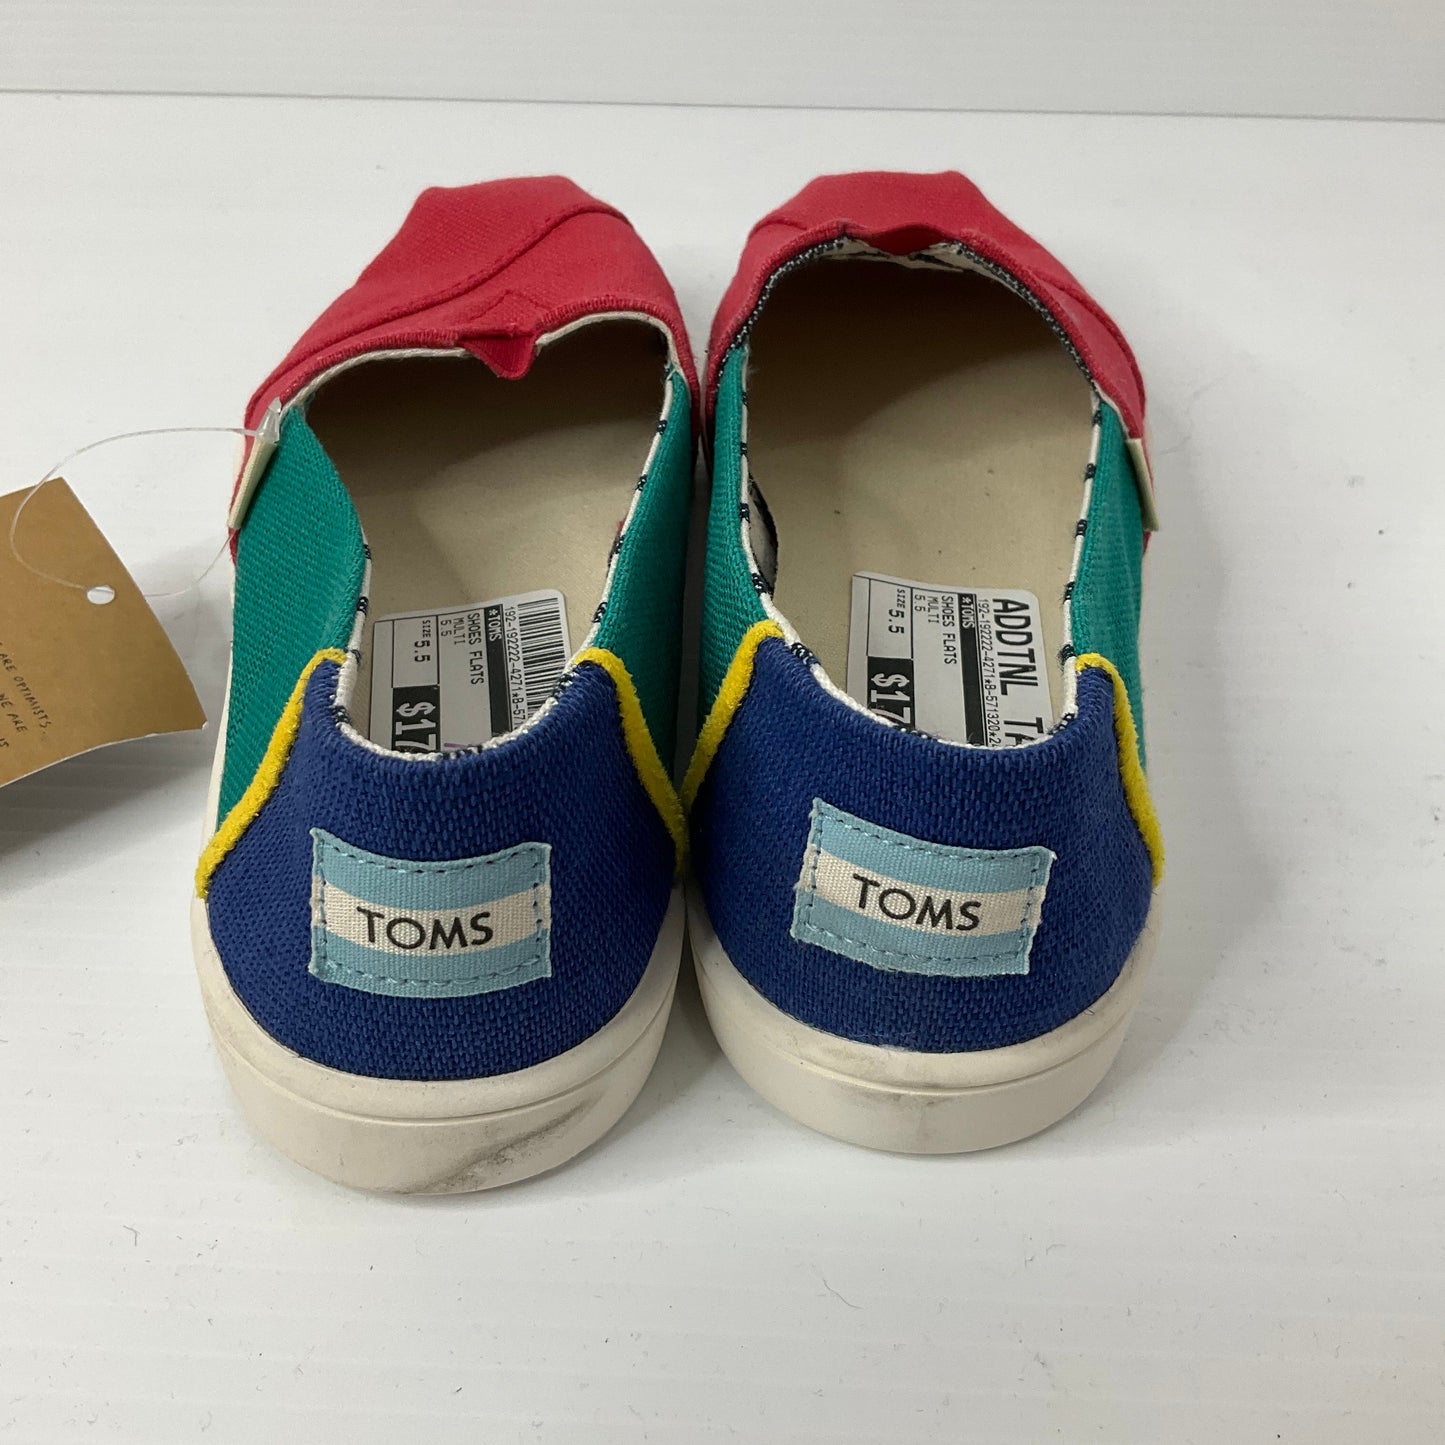 Multi-colored Shoes Flats Toms, Size 5.5